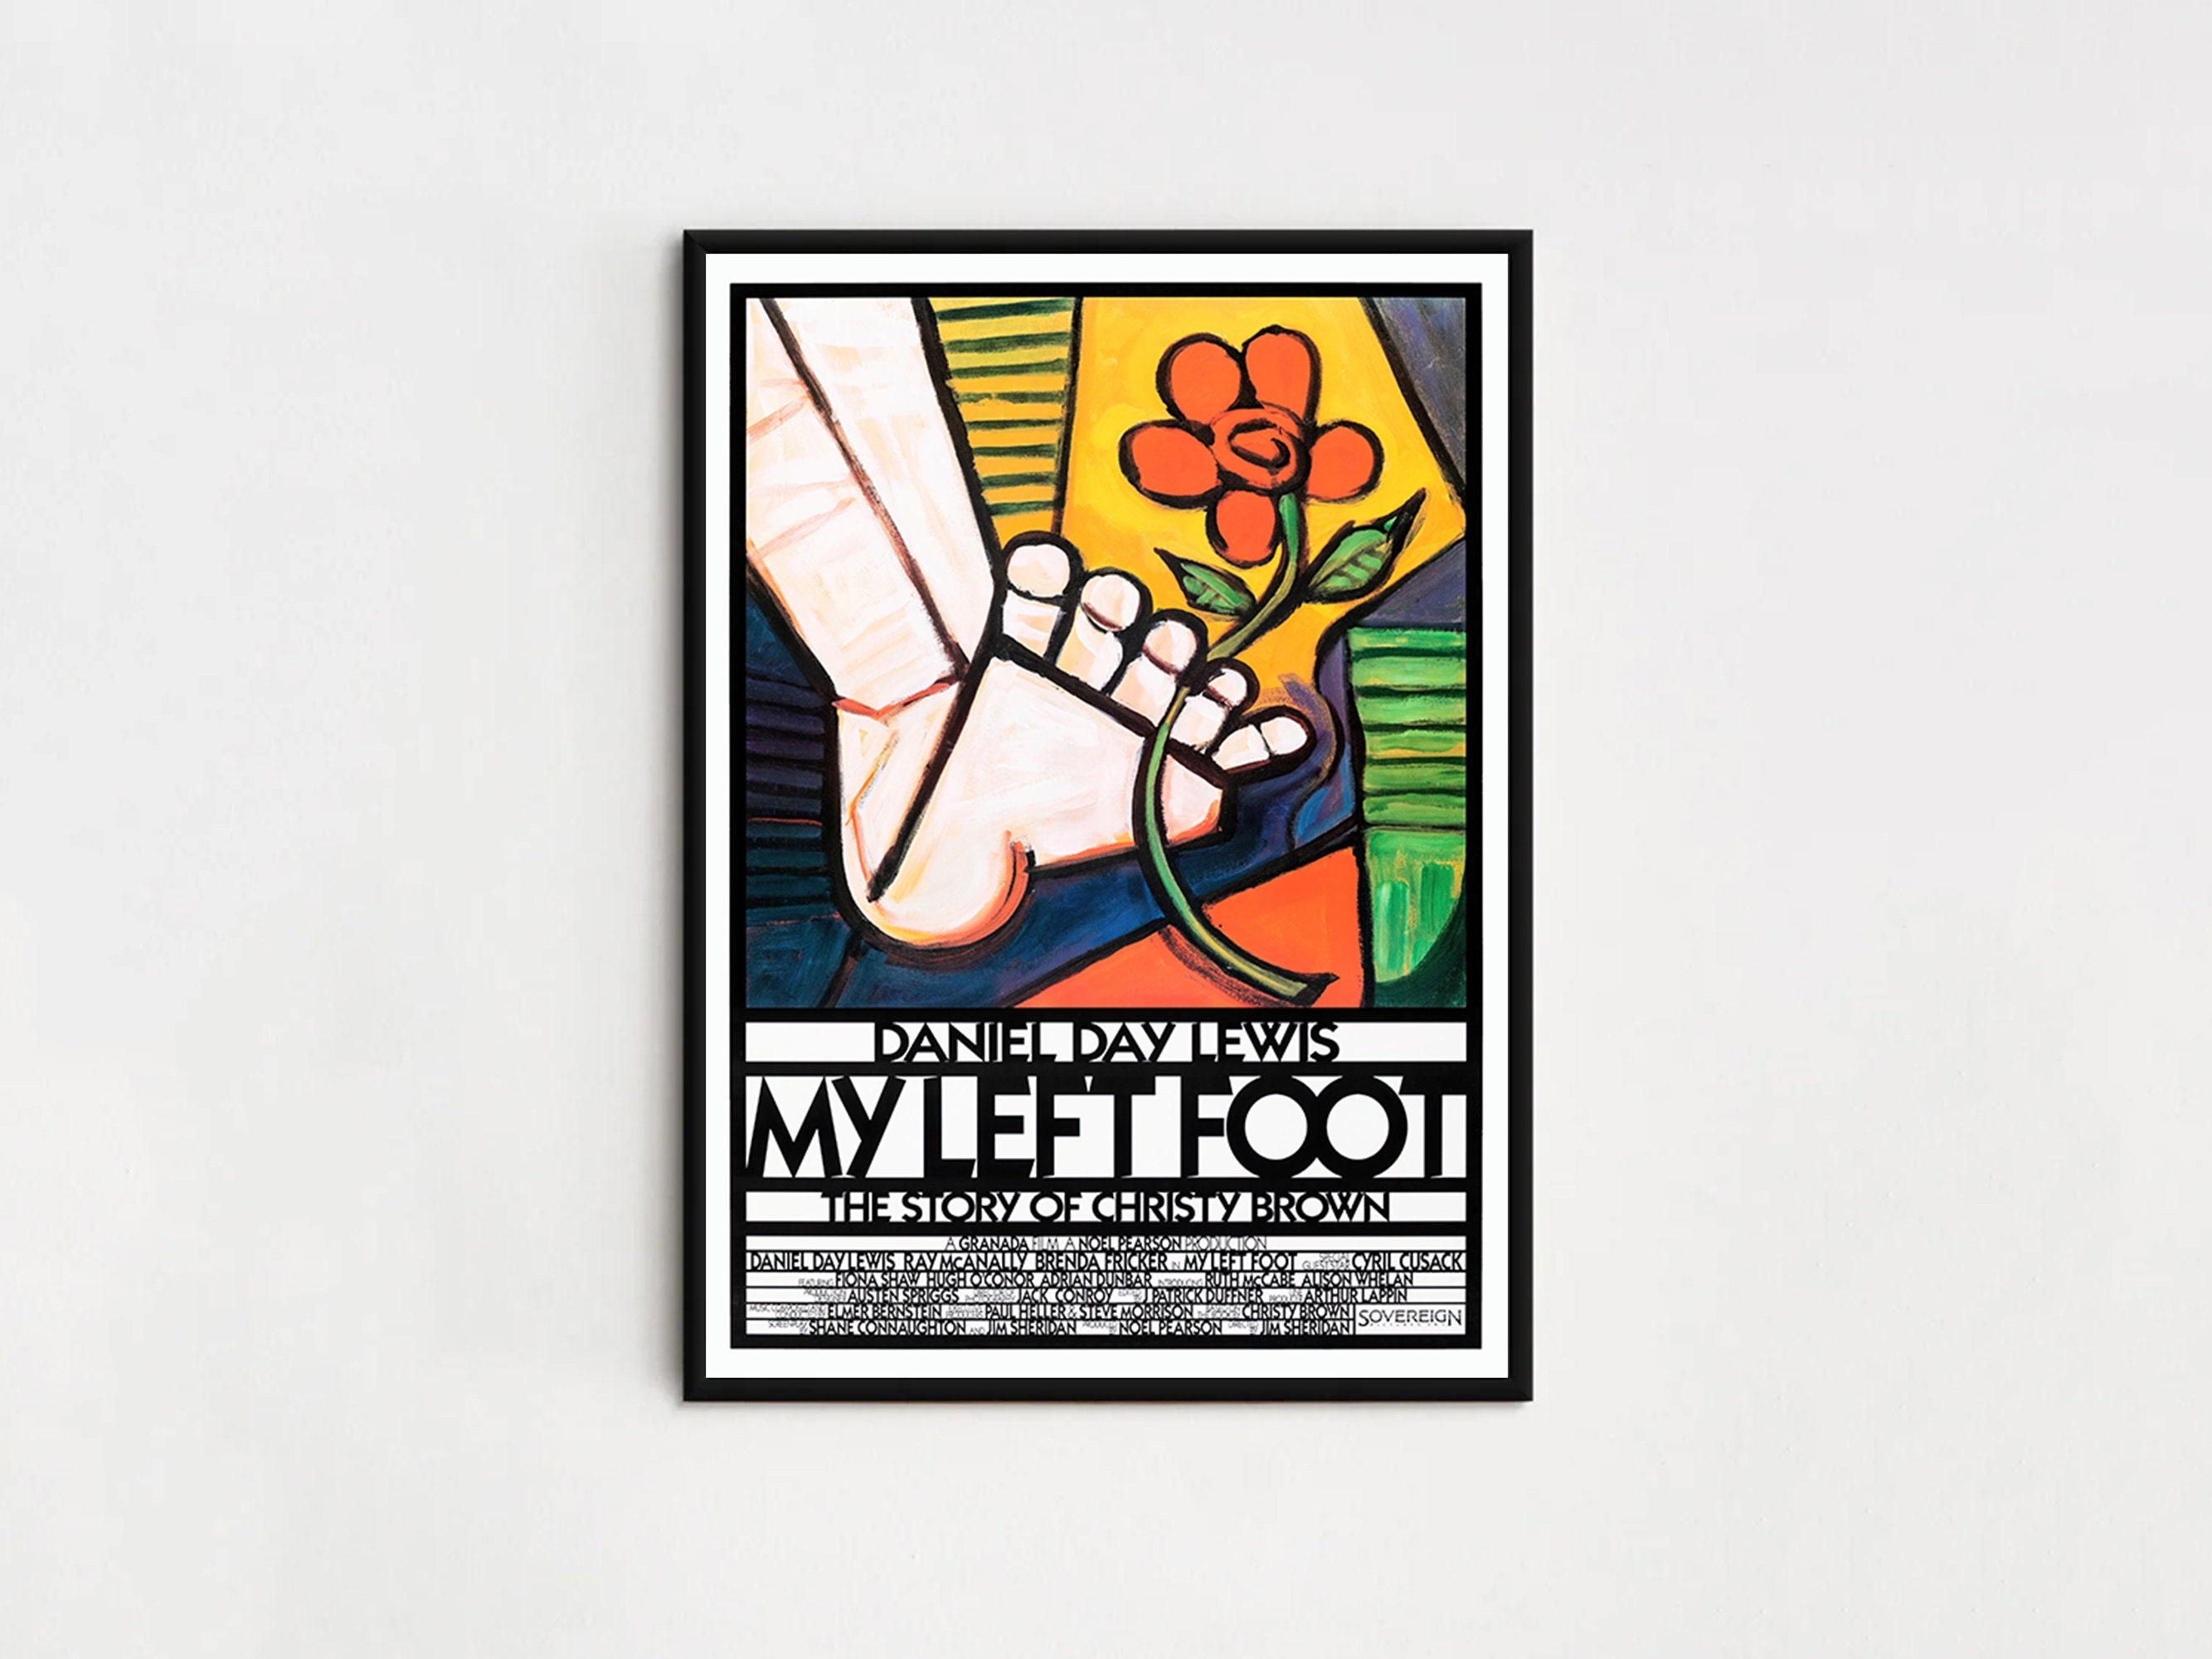 My Left Foot 1989 11x17 Movie Film POSTER daniel Day-lewis - Etsy